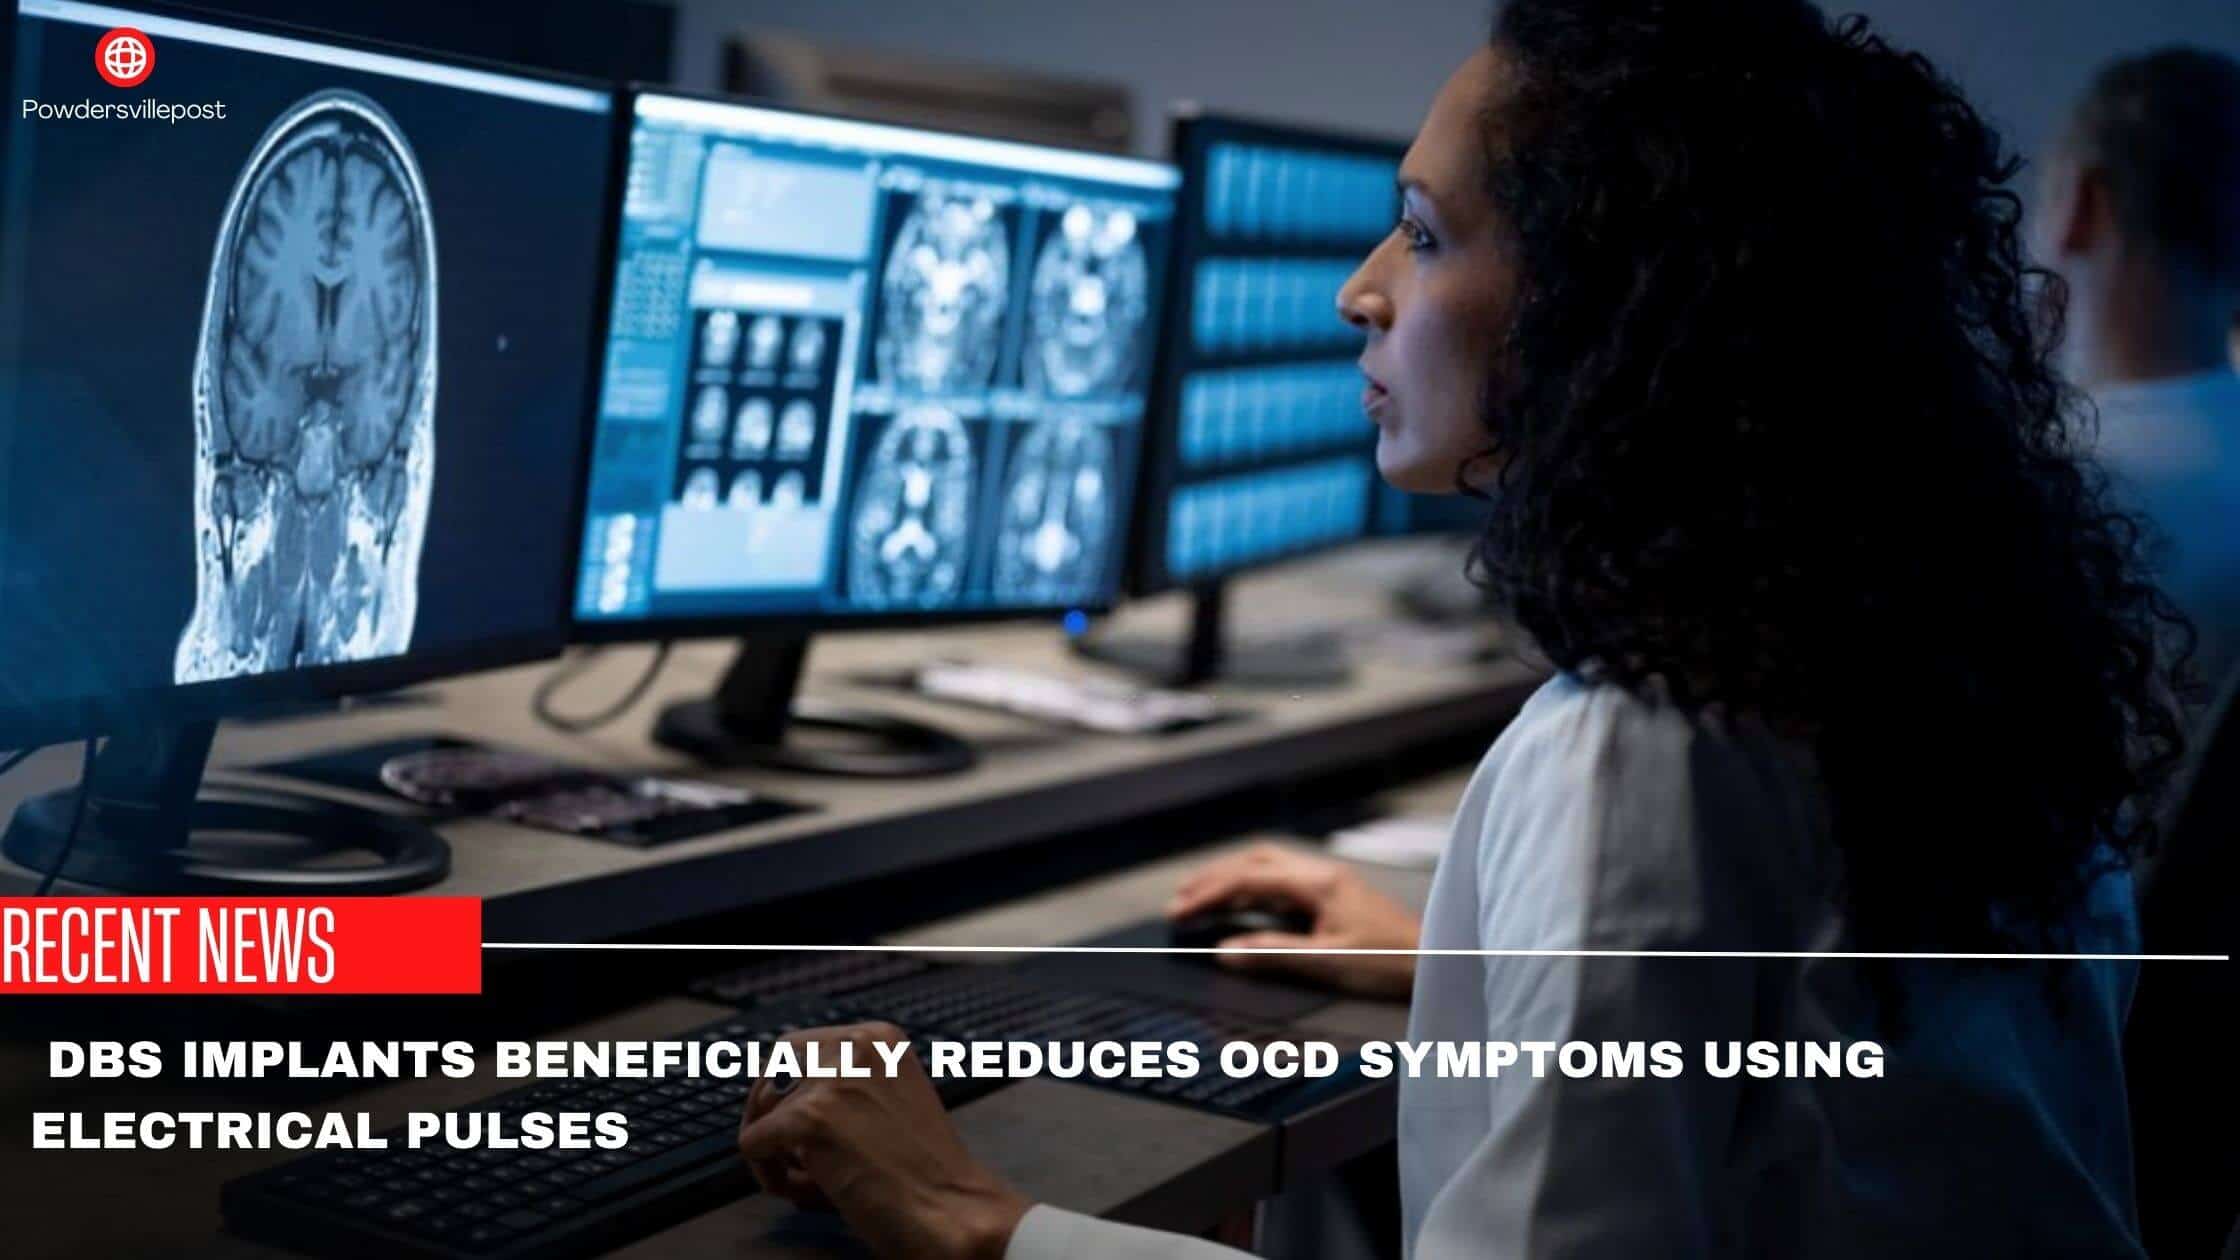 DBS Implants Beneficially Reduces OCD Symptoms Using Electrical Pulses